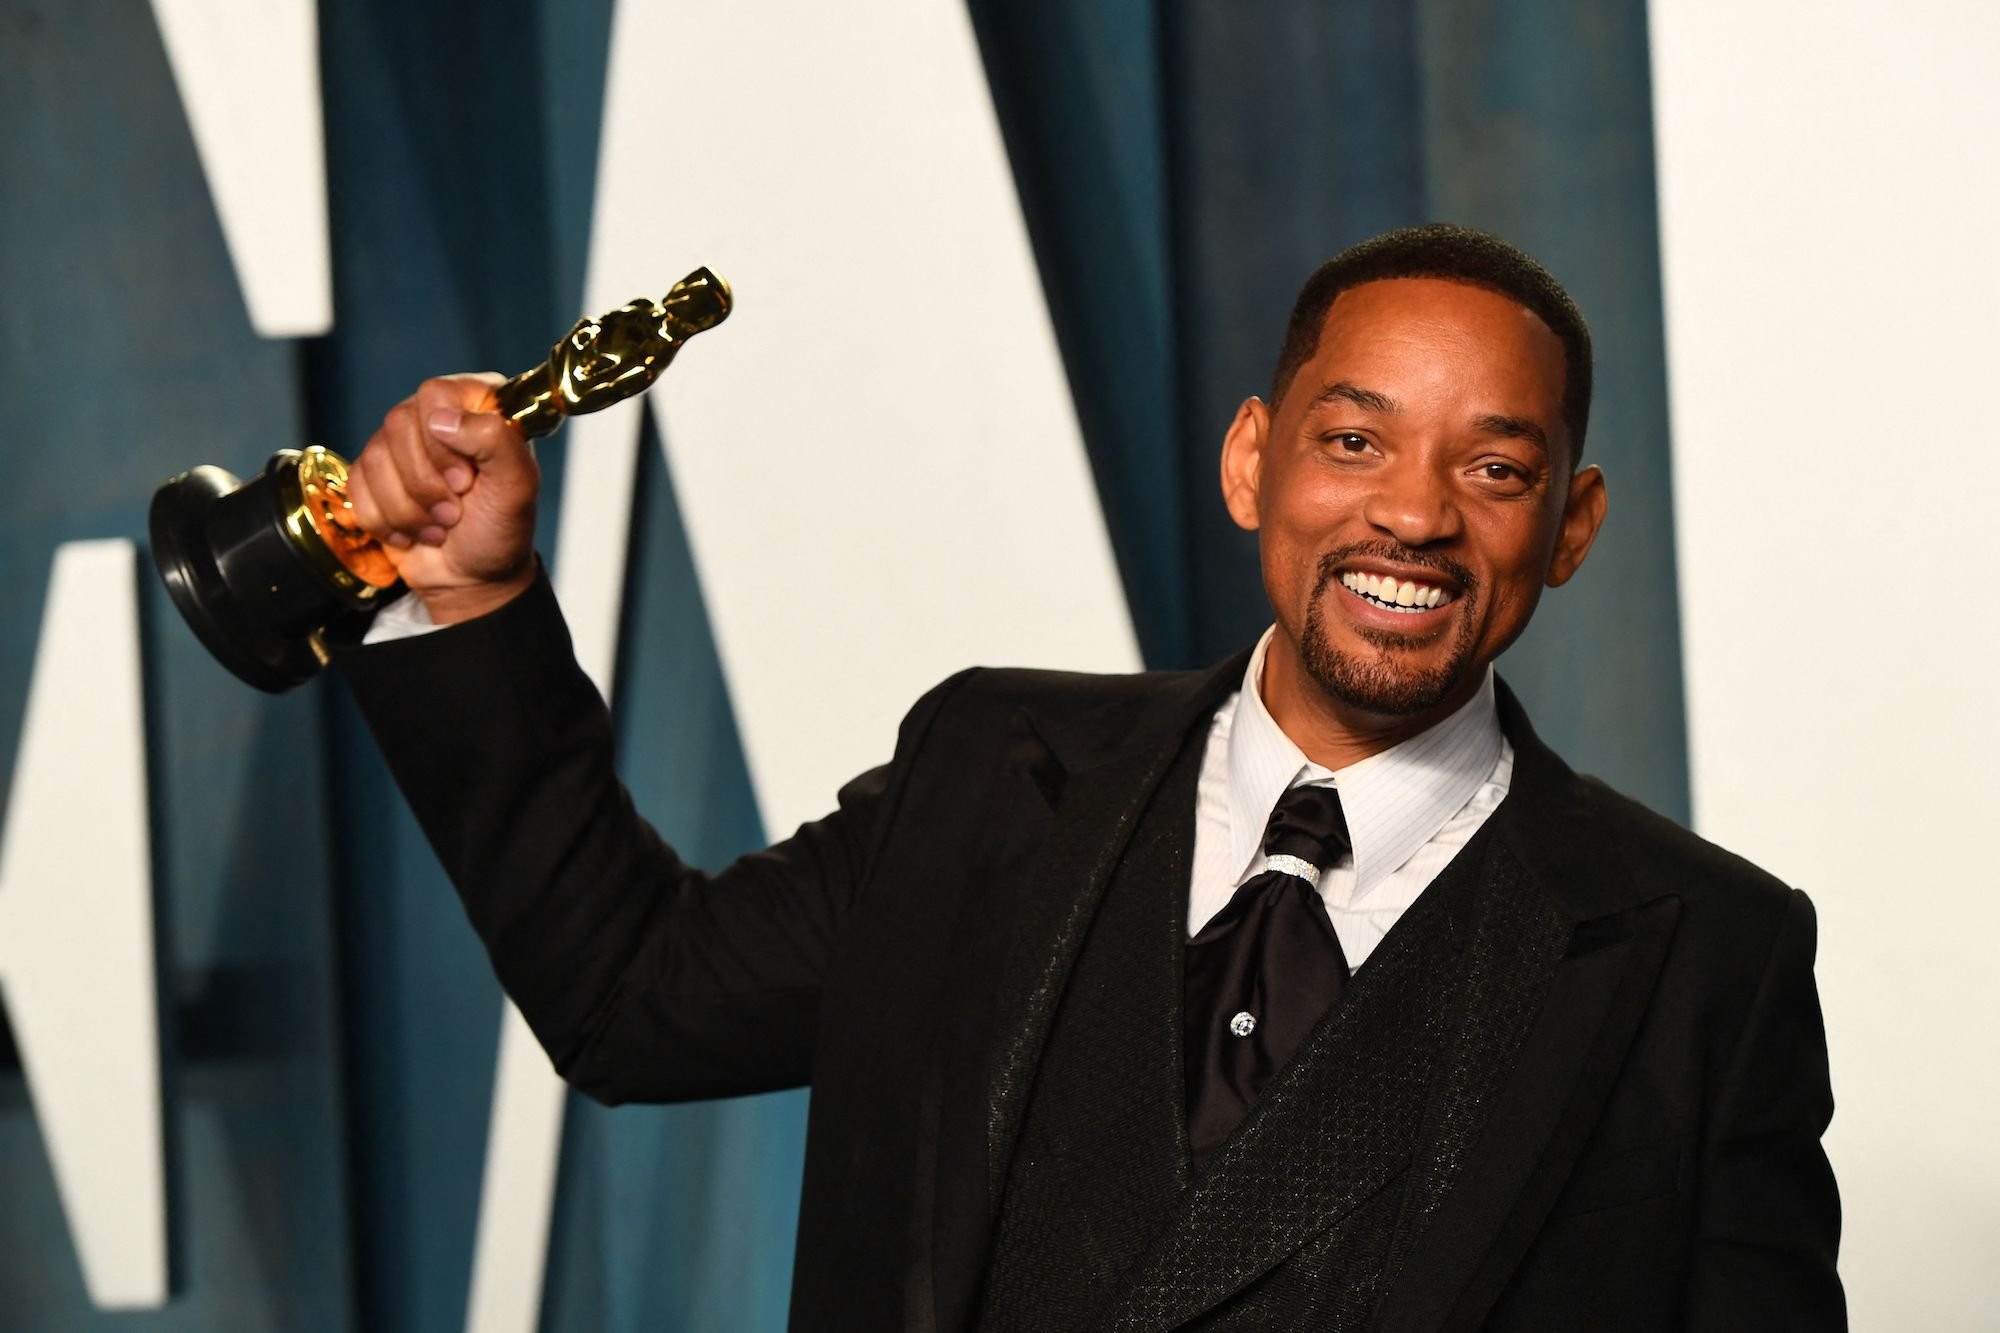 Will Smith at the Oscars 2022 holding his award for Outstanding Actor. Smith slapped Chris Rock on stage when he made a joke about his wife, Jada Pinkett Smith